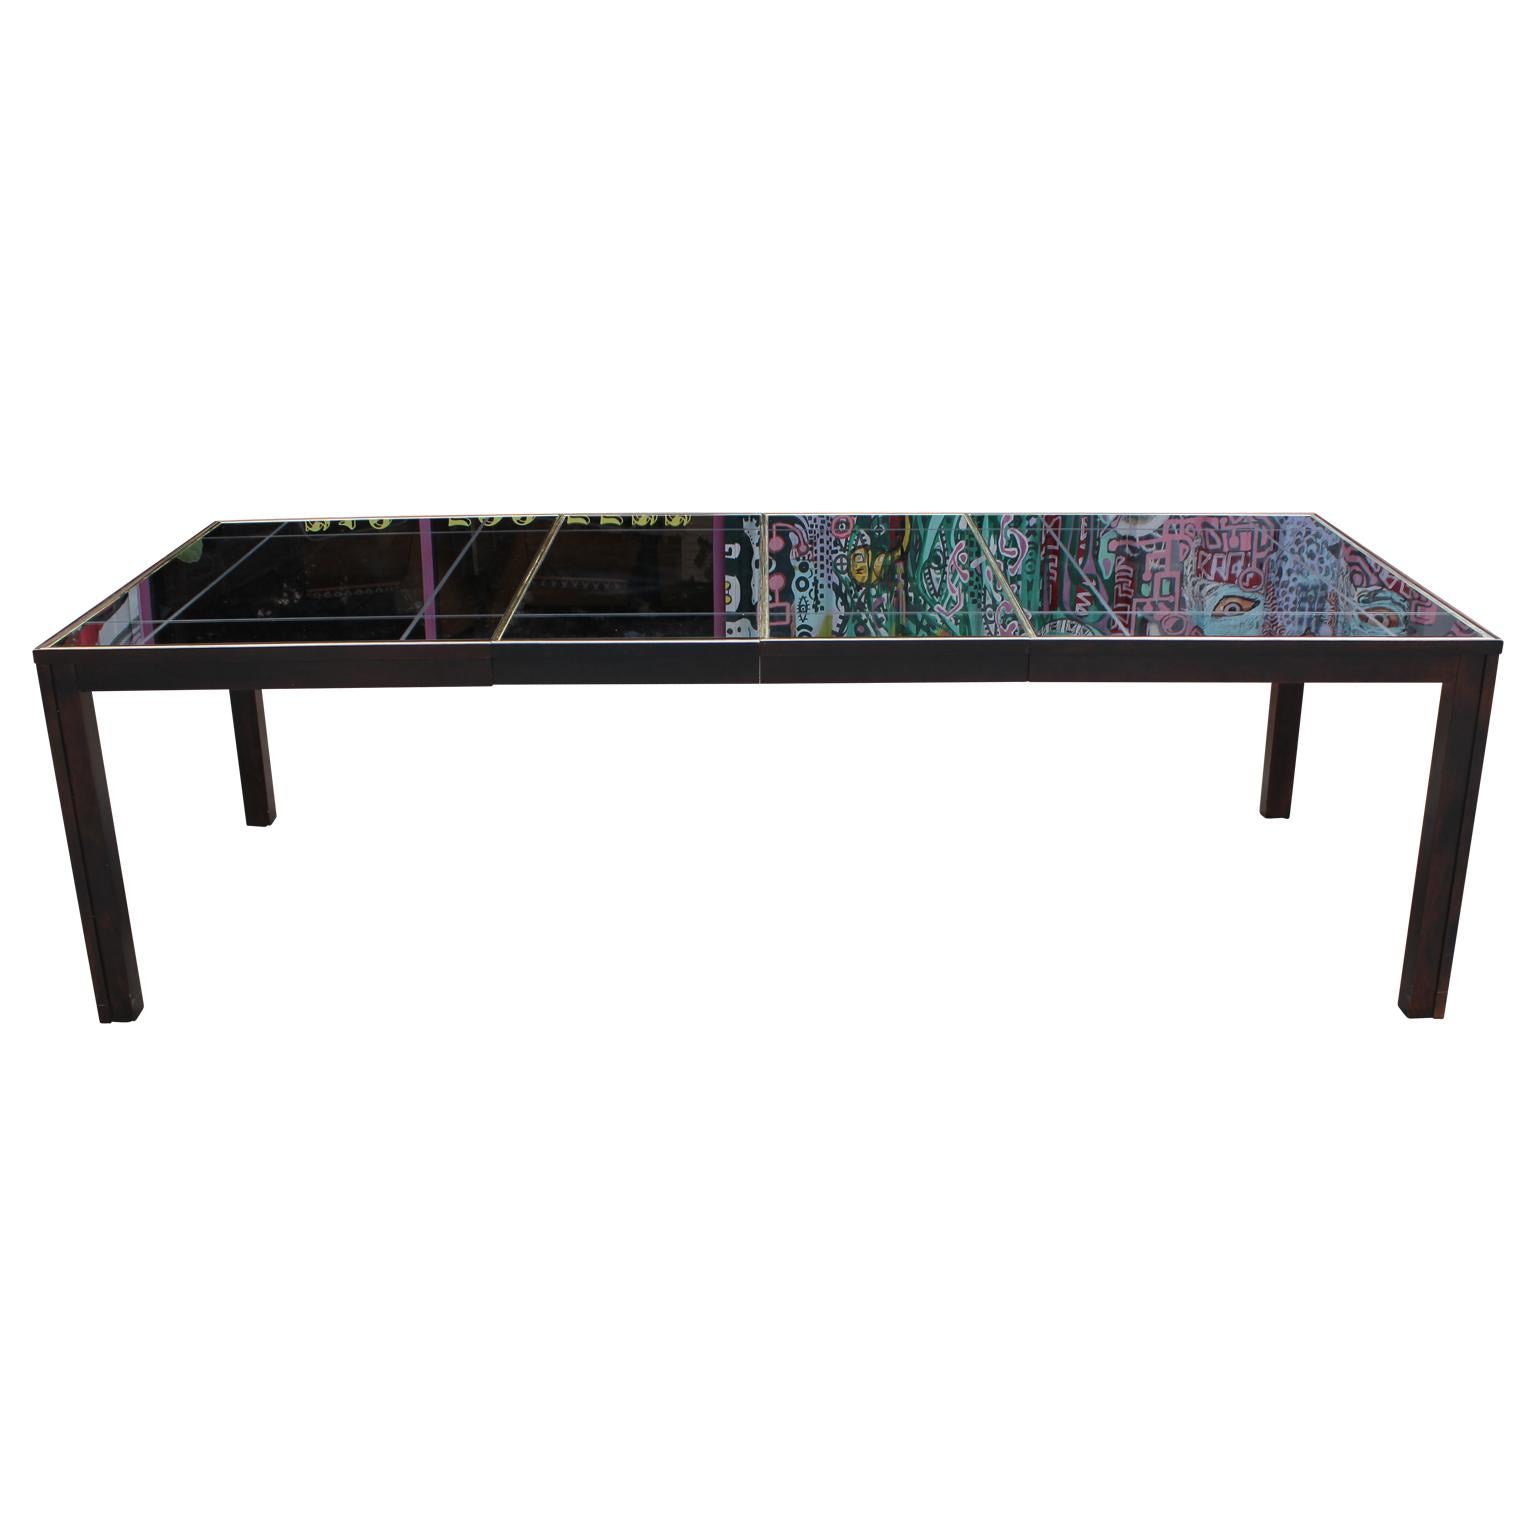 Gorgeous and sleek rectangular dining table with a unique smoked mirror top and a lovely brass inlay.